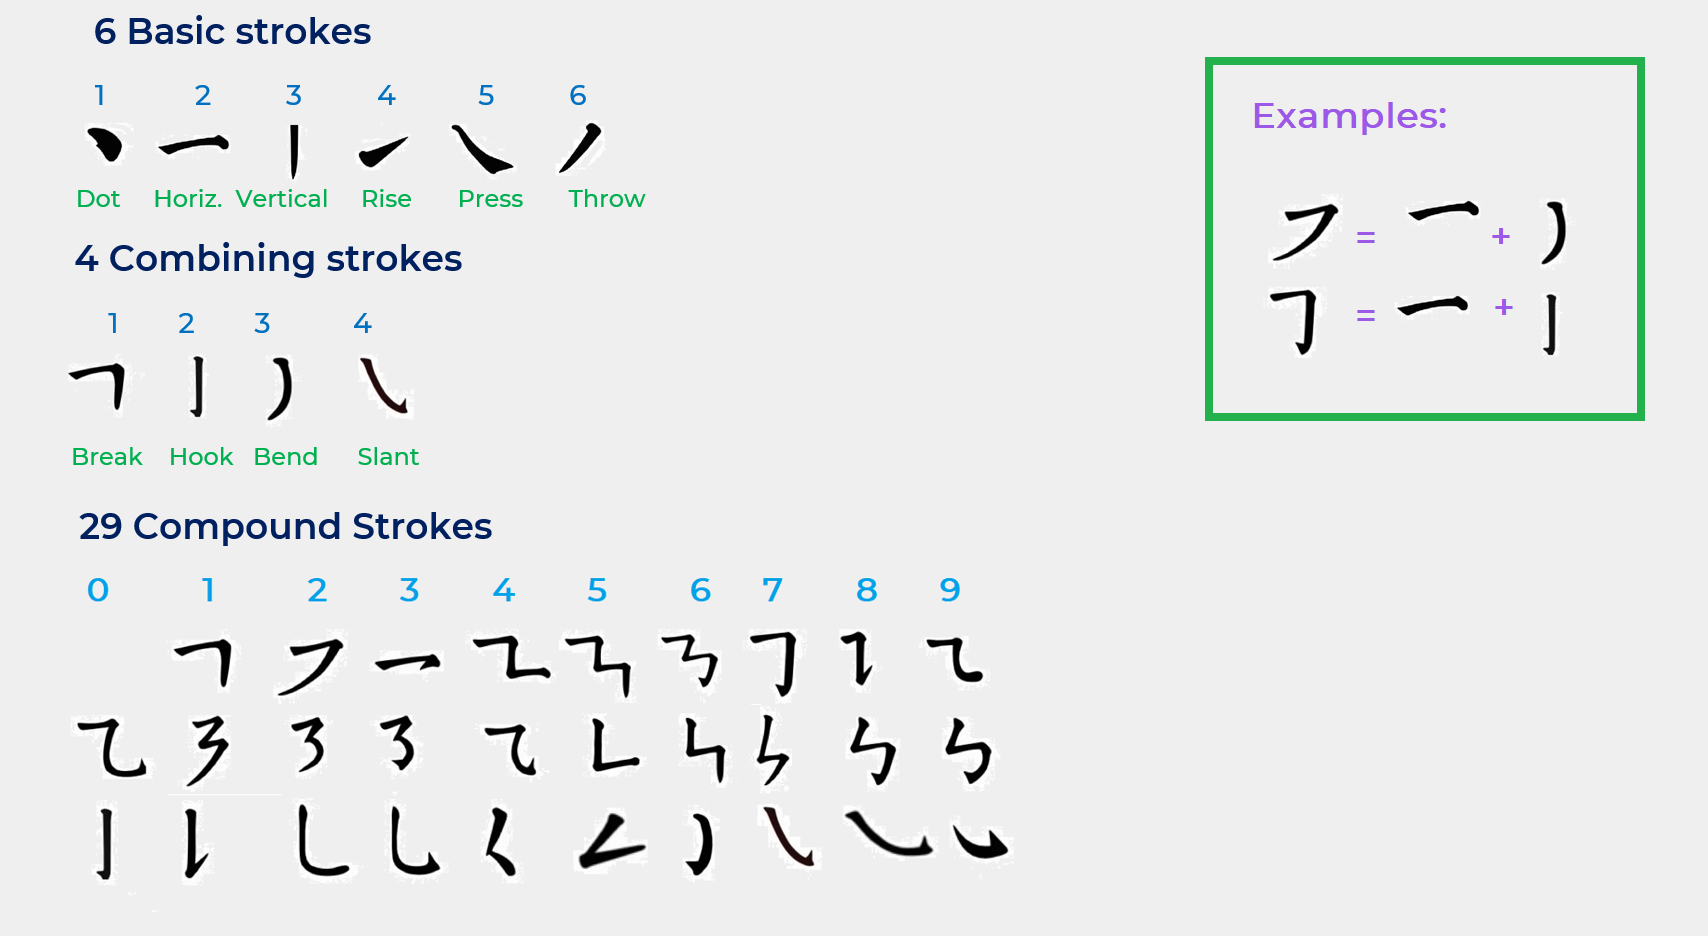 chinese stroke order practice